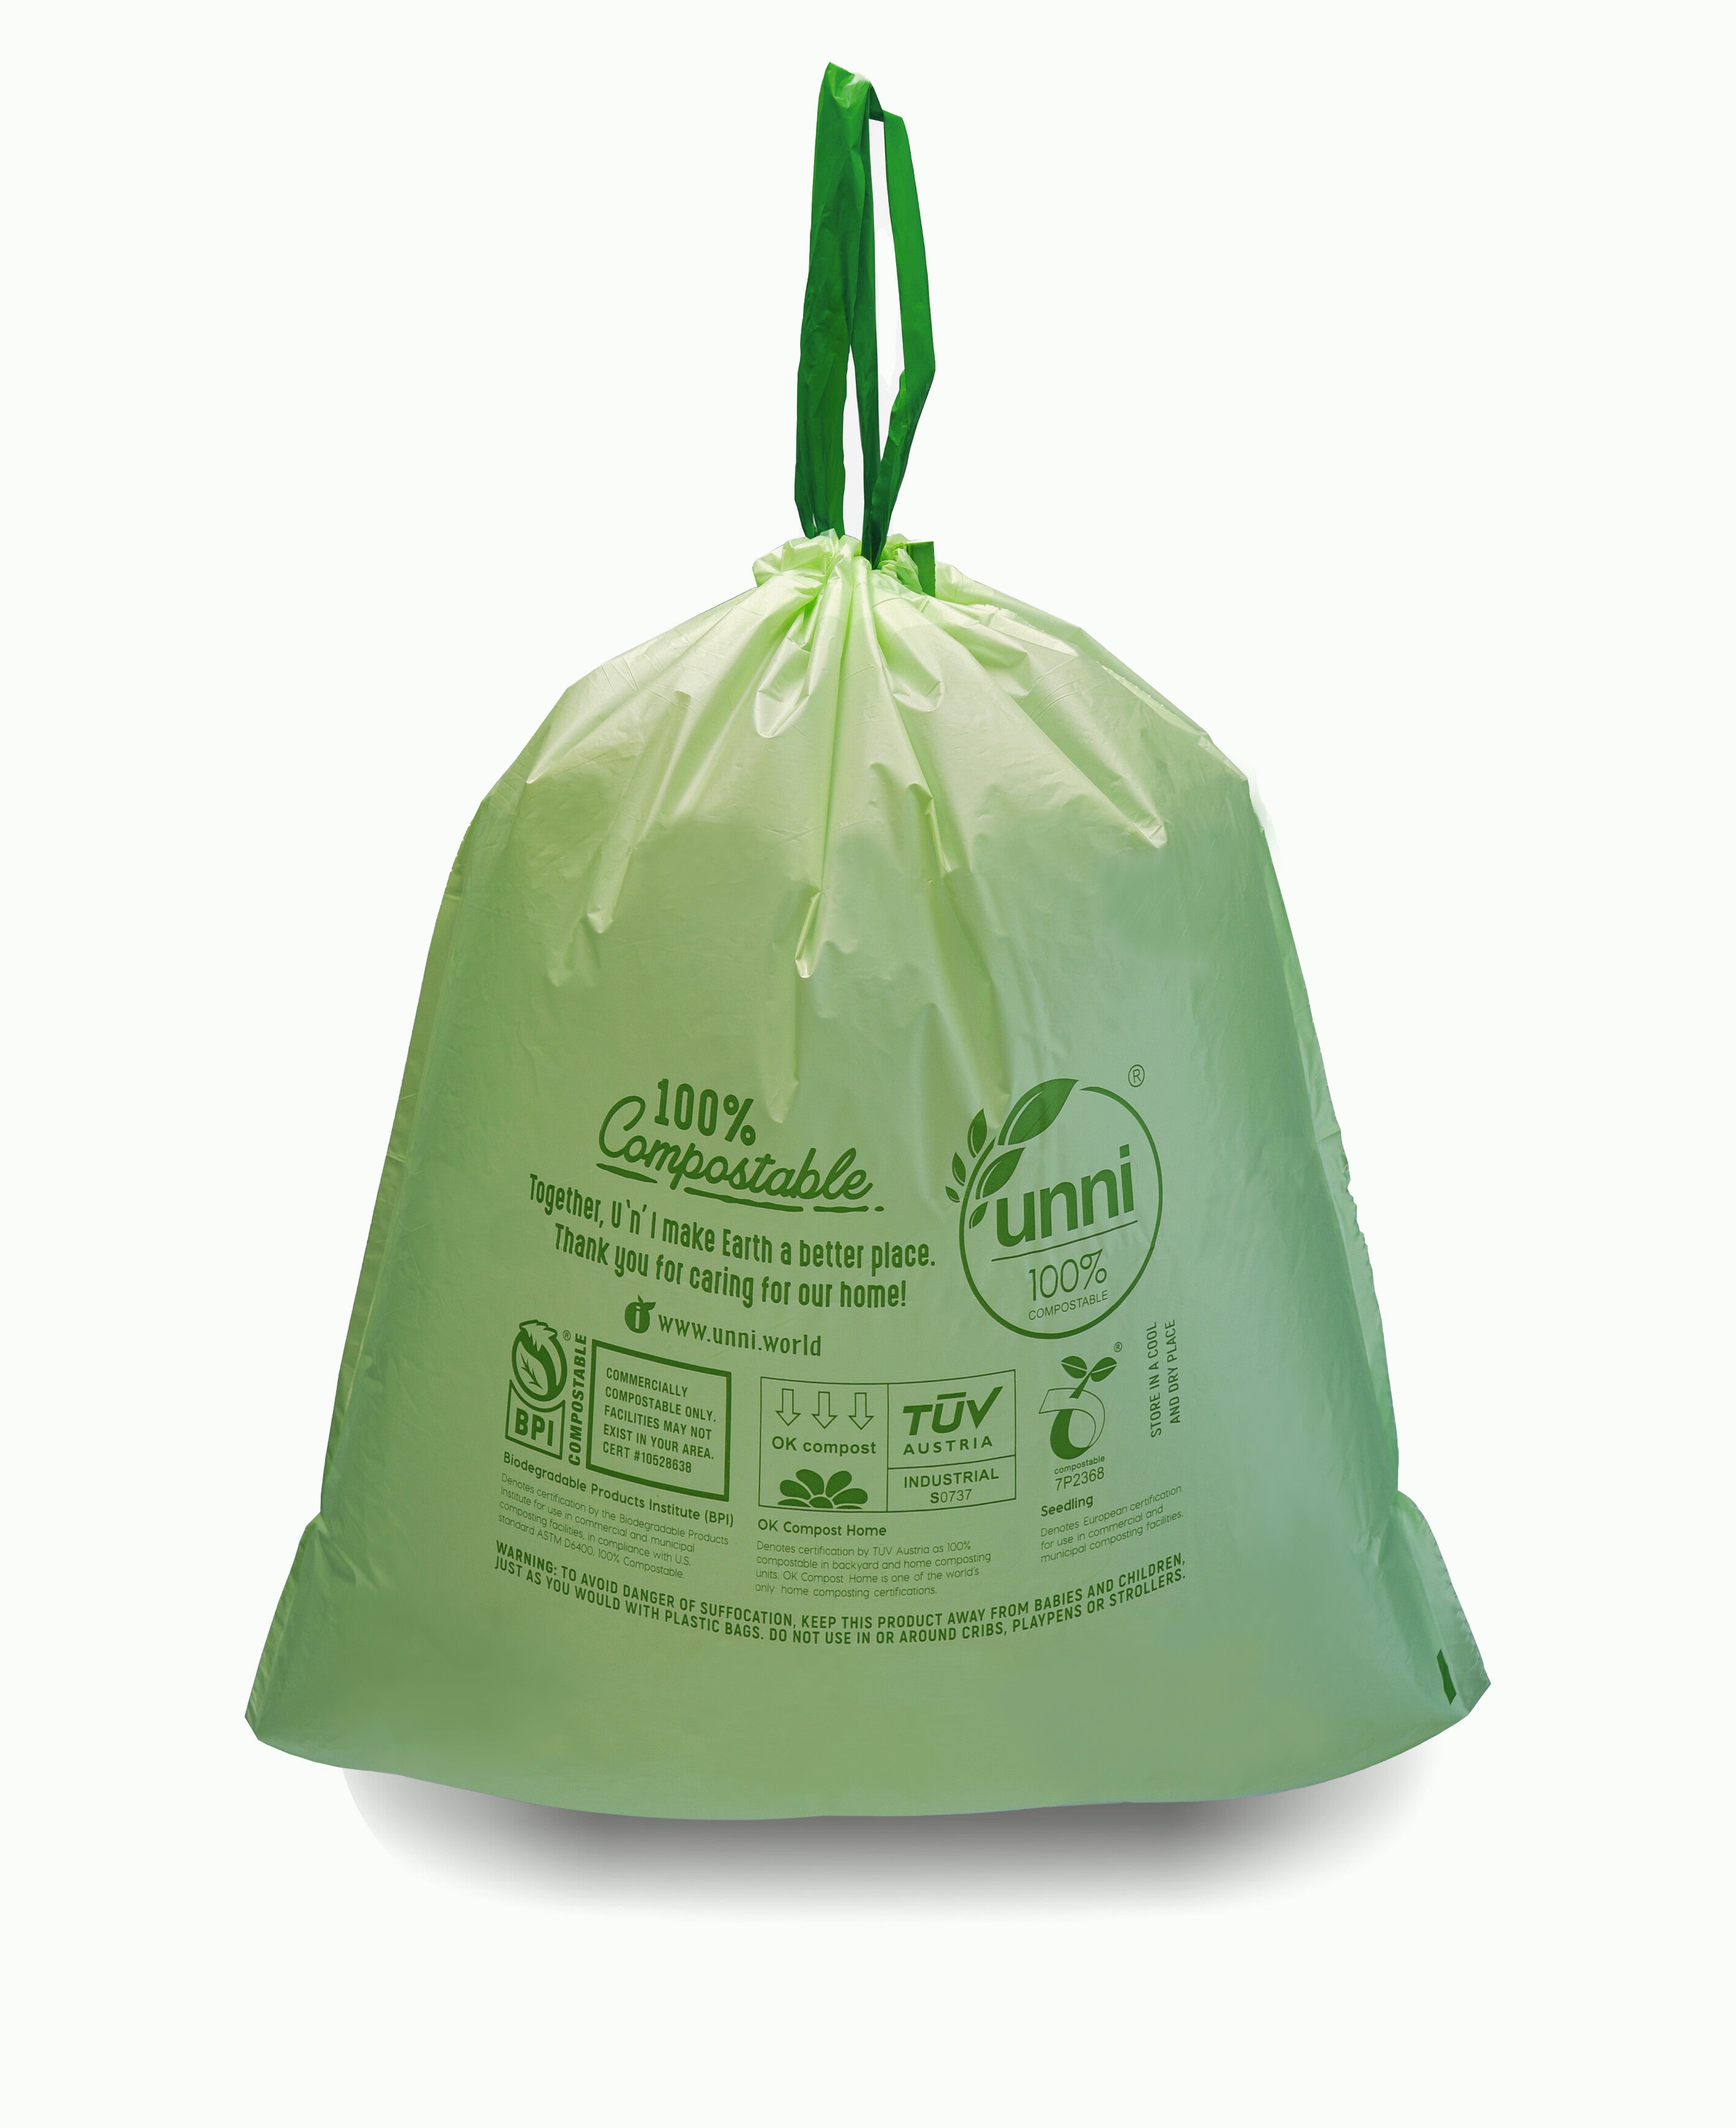 Buy Baia Compostable Tall Trash Bags, BPI ASTM D6400 Certified, 13 Gallon  24x32 Inch, 0.88 Mils, Heavy Duty, Strong, Thicker, Home Kitchen Garbage,  Food Waste Bags Now! Only $